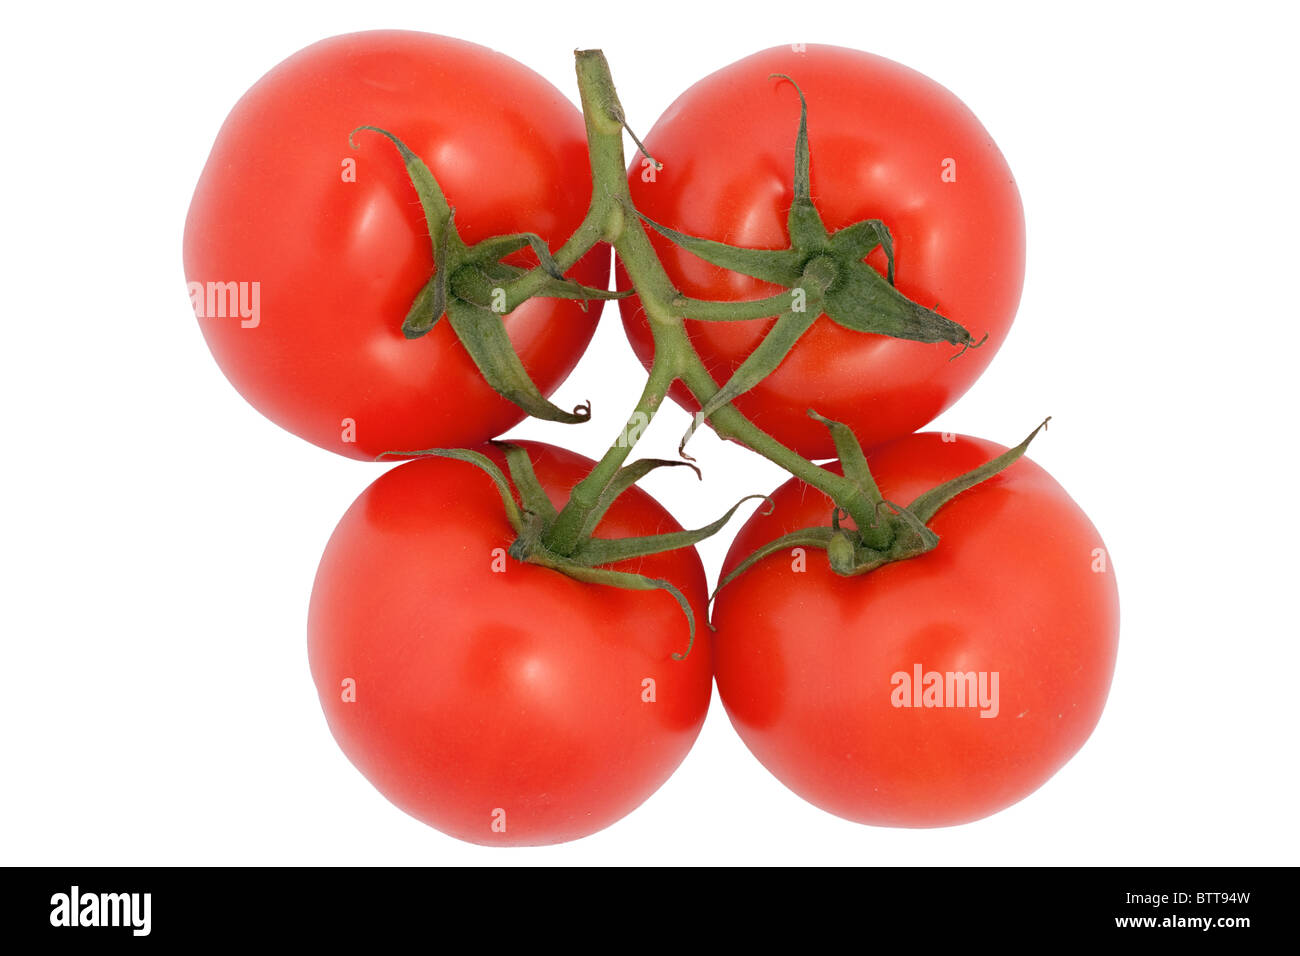 Bunch of ripe healthy tomatoes, isolated on white background. Stock Photo